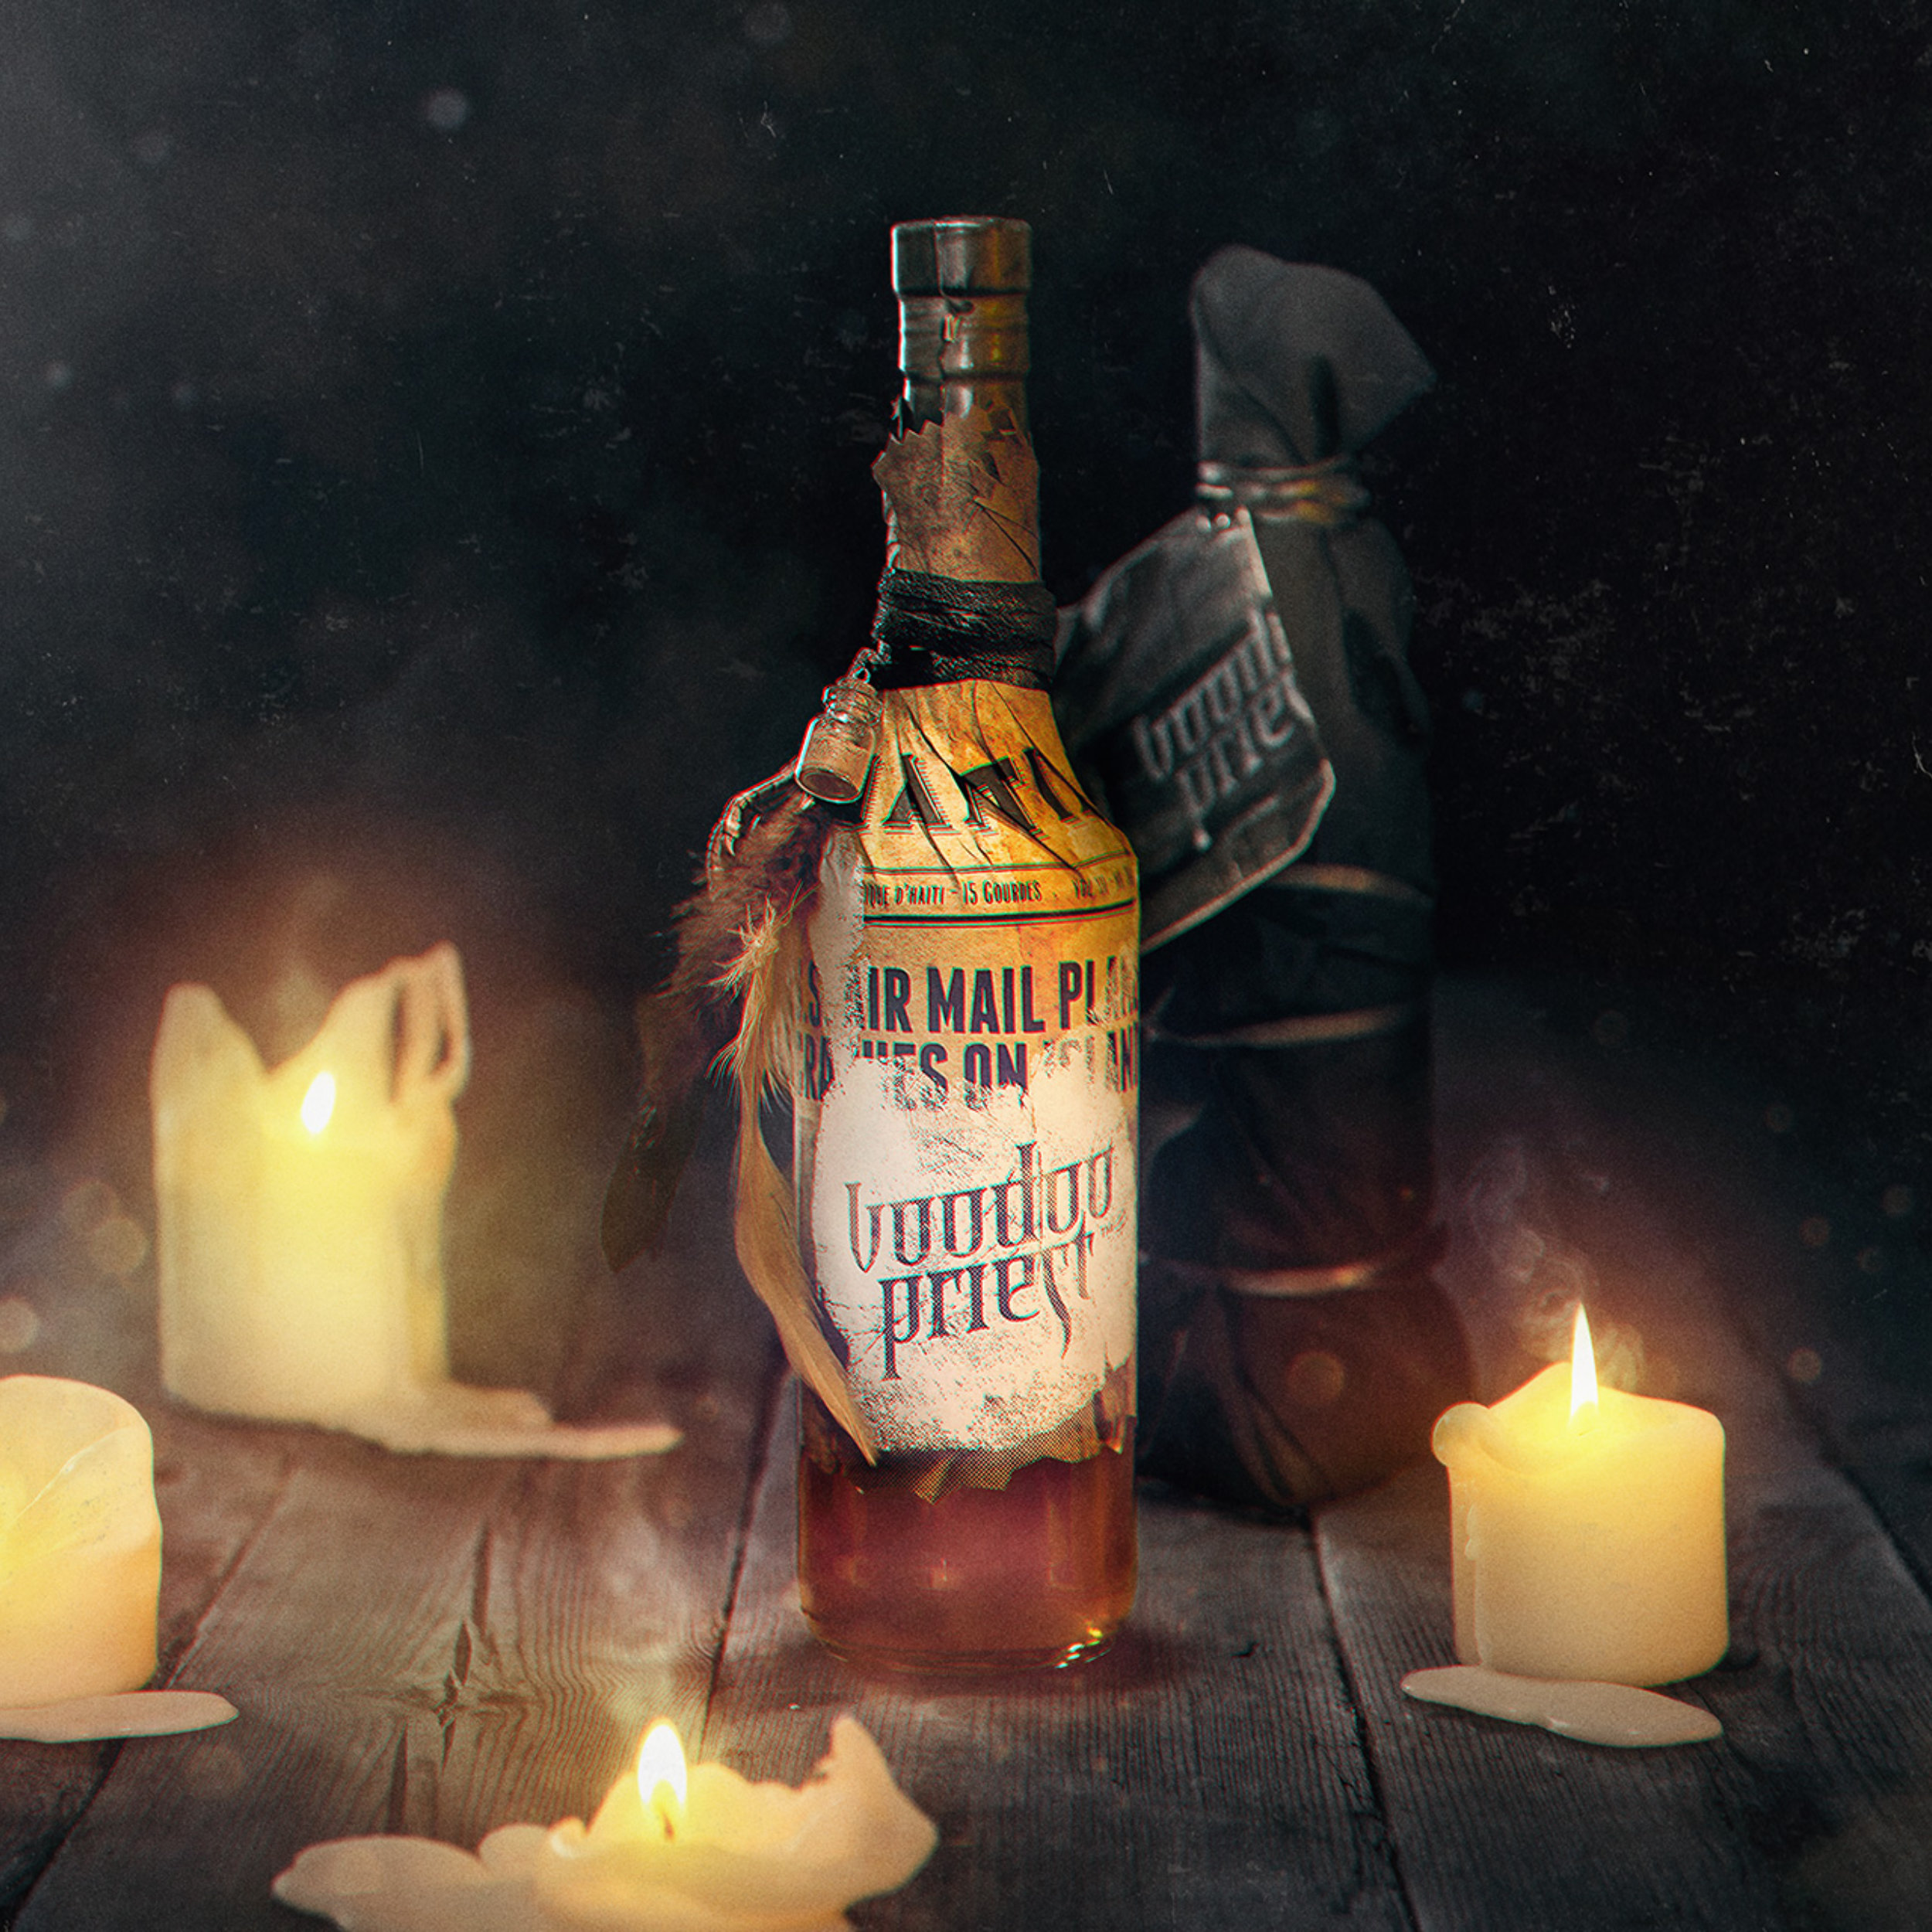 Voodoo Priest „The World’s only Ritual Rum“